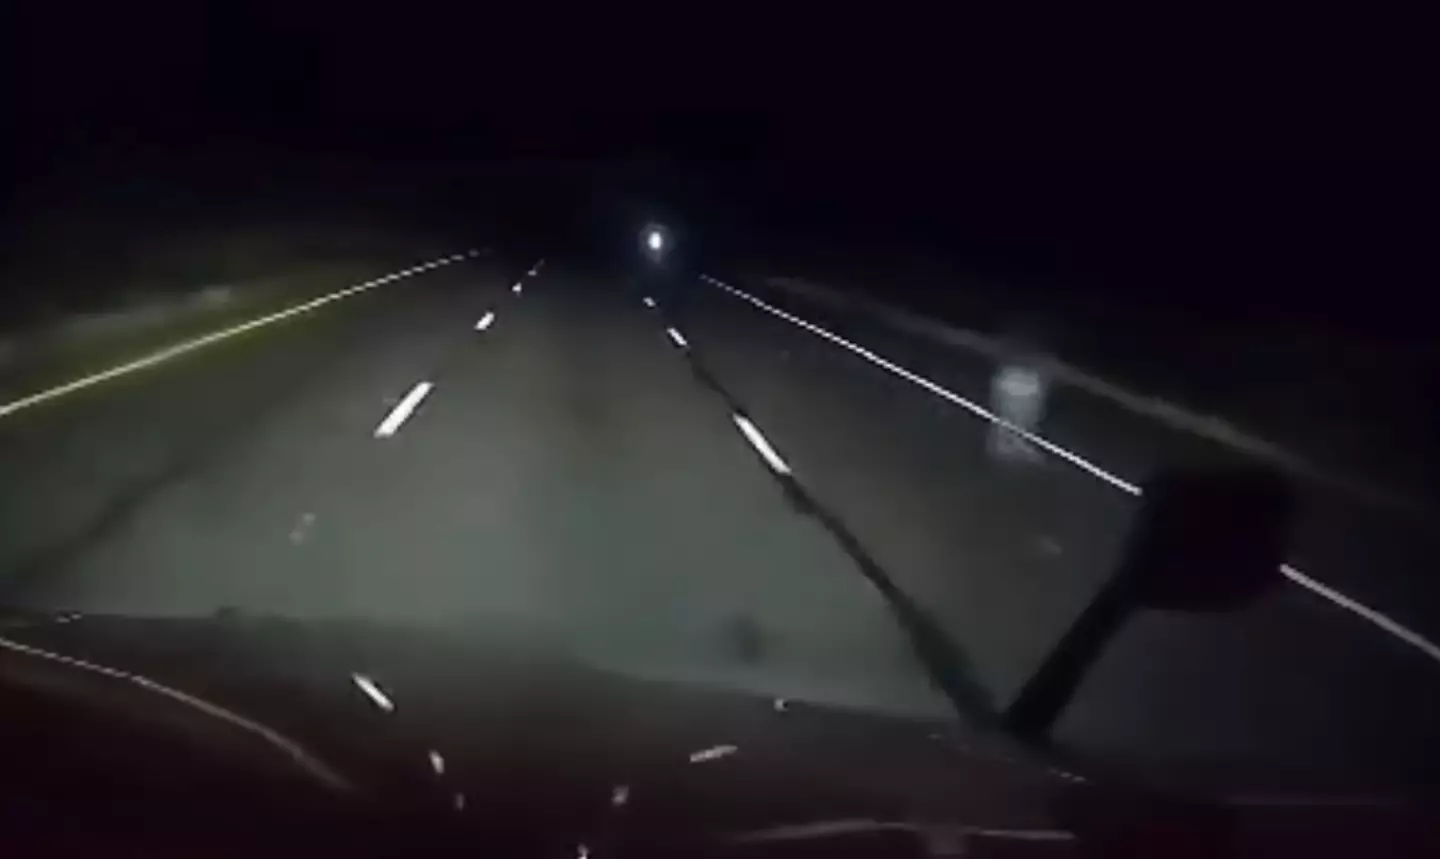 What's that thing on the road, is it a ghost?